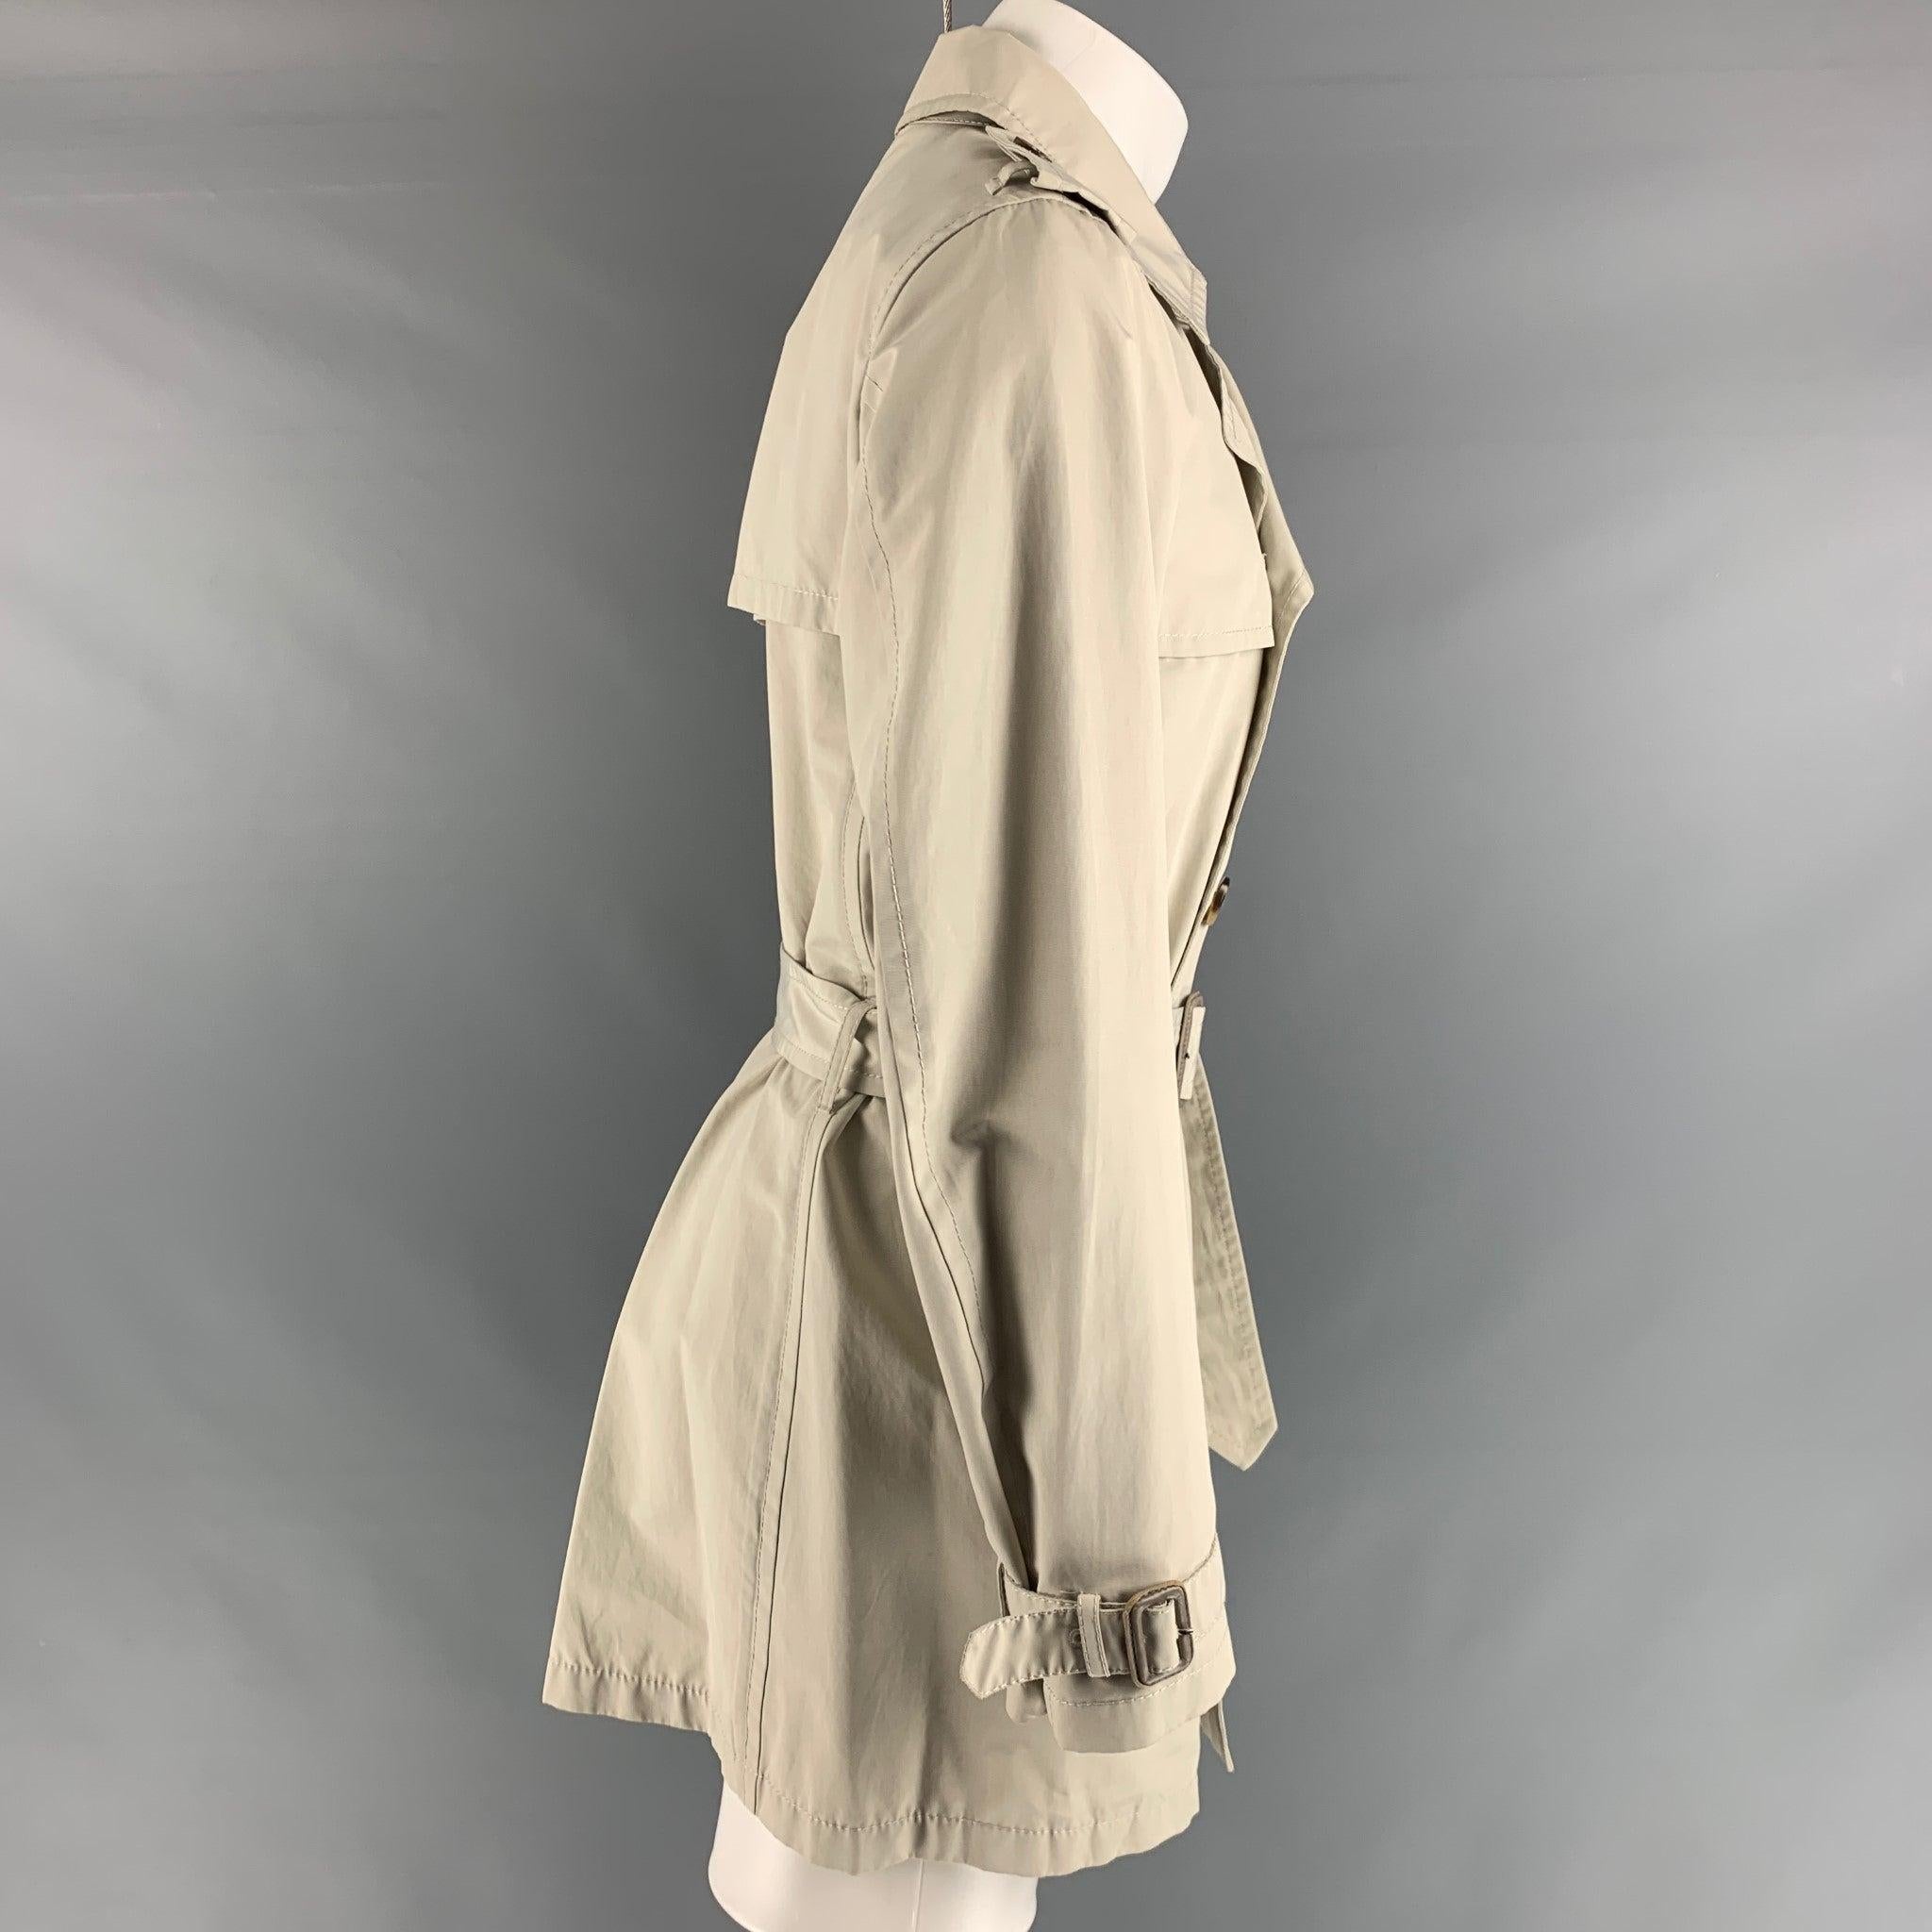 PRADA trench coat comes in a ivory cotton and polyester woven material featuring a belted style, epaulettes, front pockets, and a double breasted closure. Made in Italy.Very Good Pre-Owned Condition. Minor marks, please see pictures. 

Marked:  48